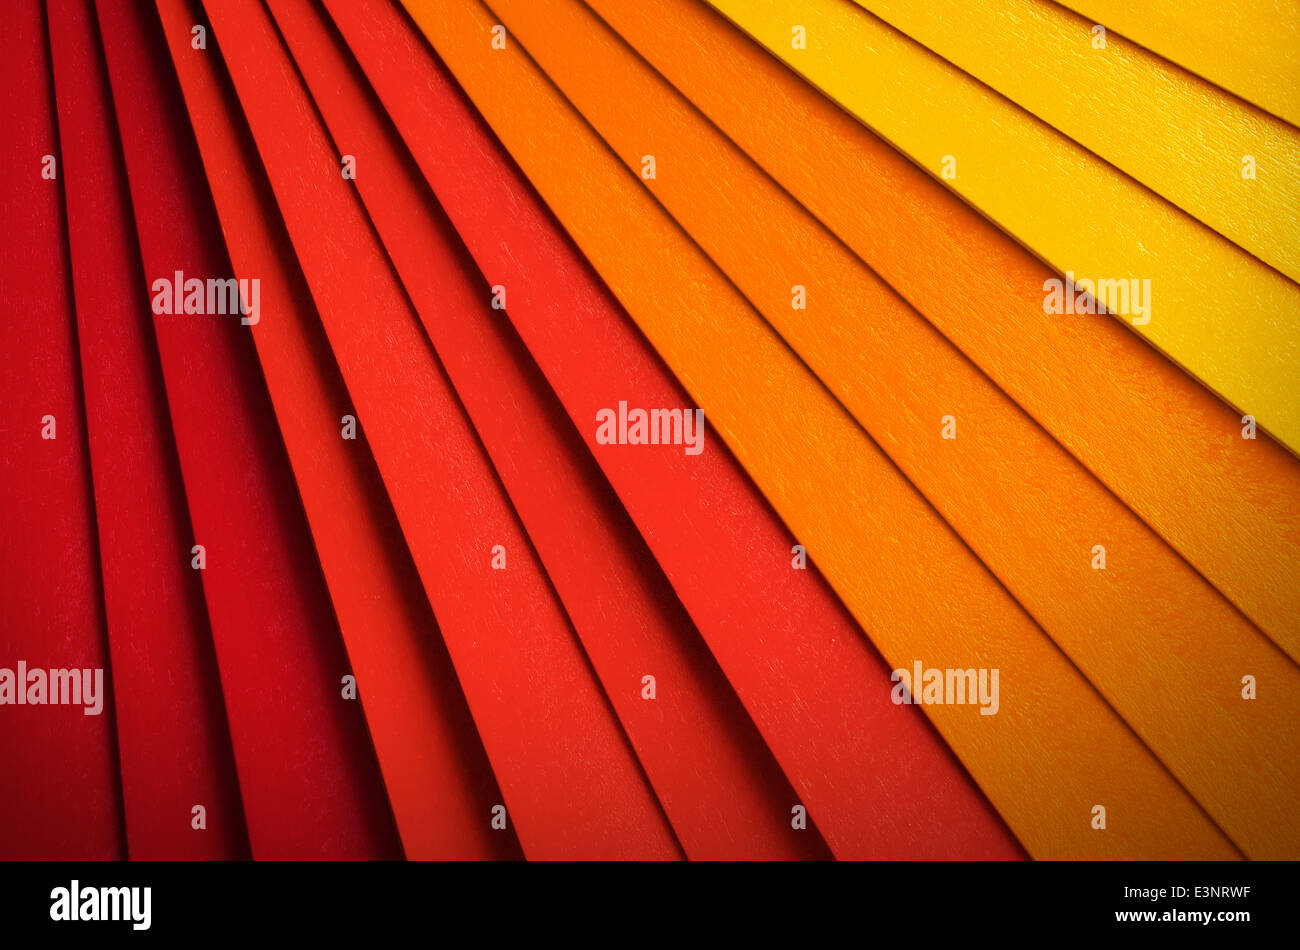 Radial abstract background with blending colors from red to yellow Stock Photo